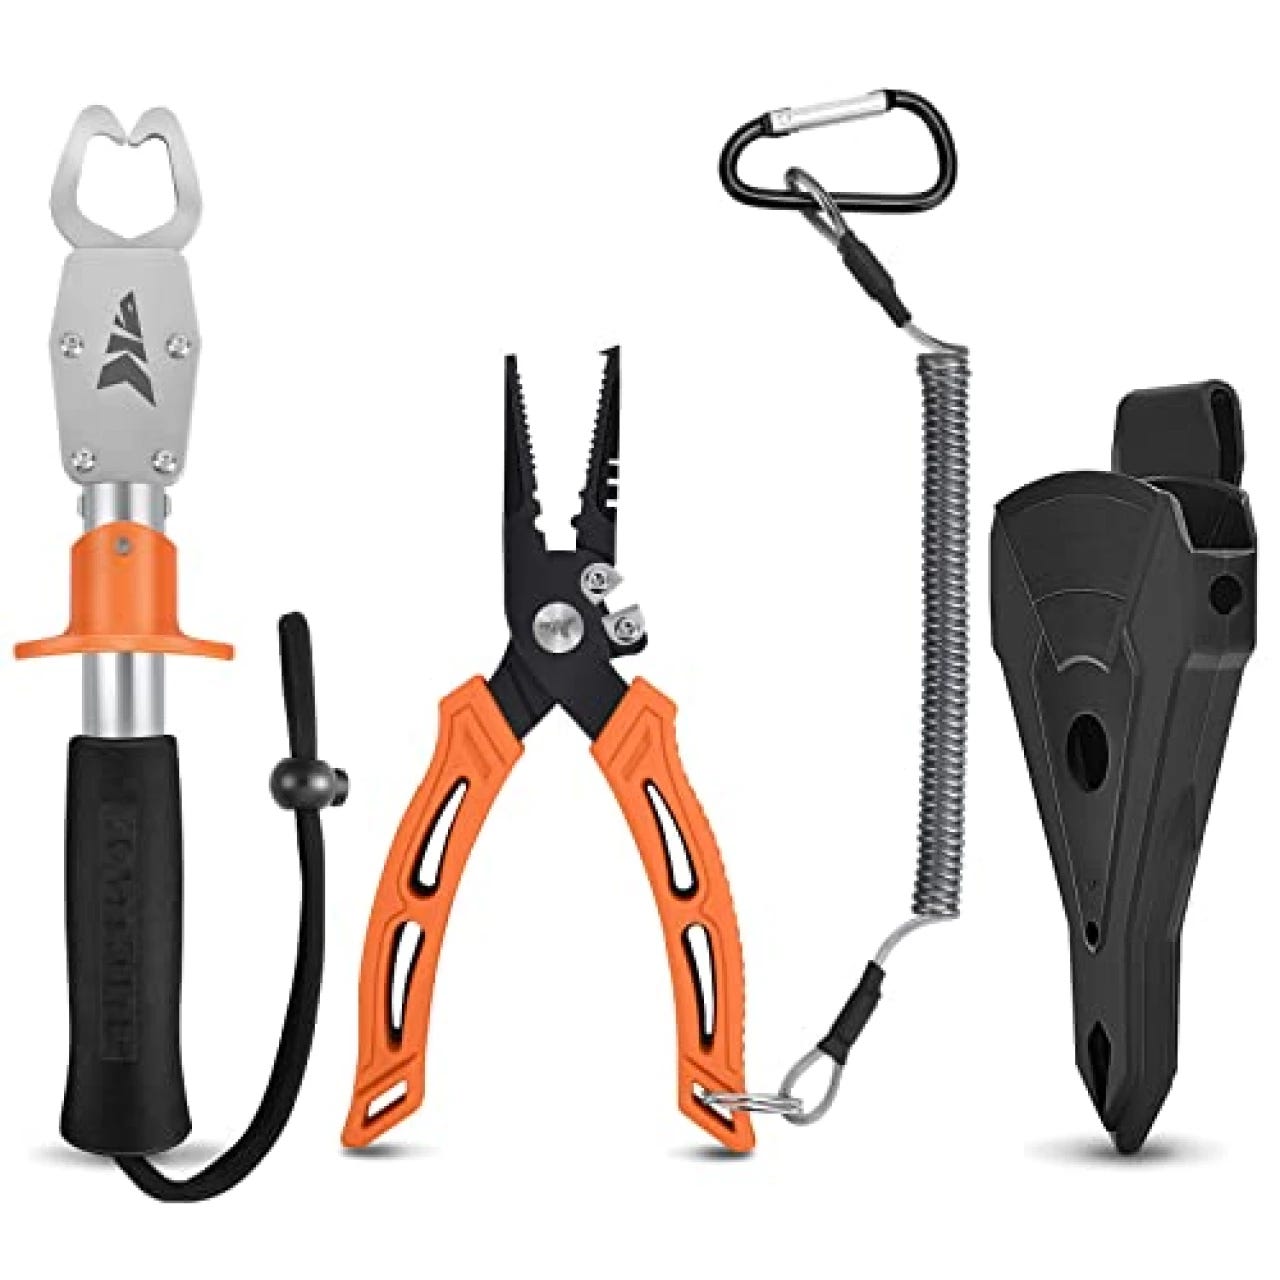 2023's Top 5 Fishing Tools: Pliers, Grippers, Scales for Anglers